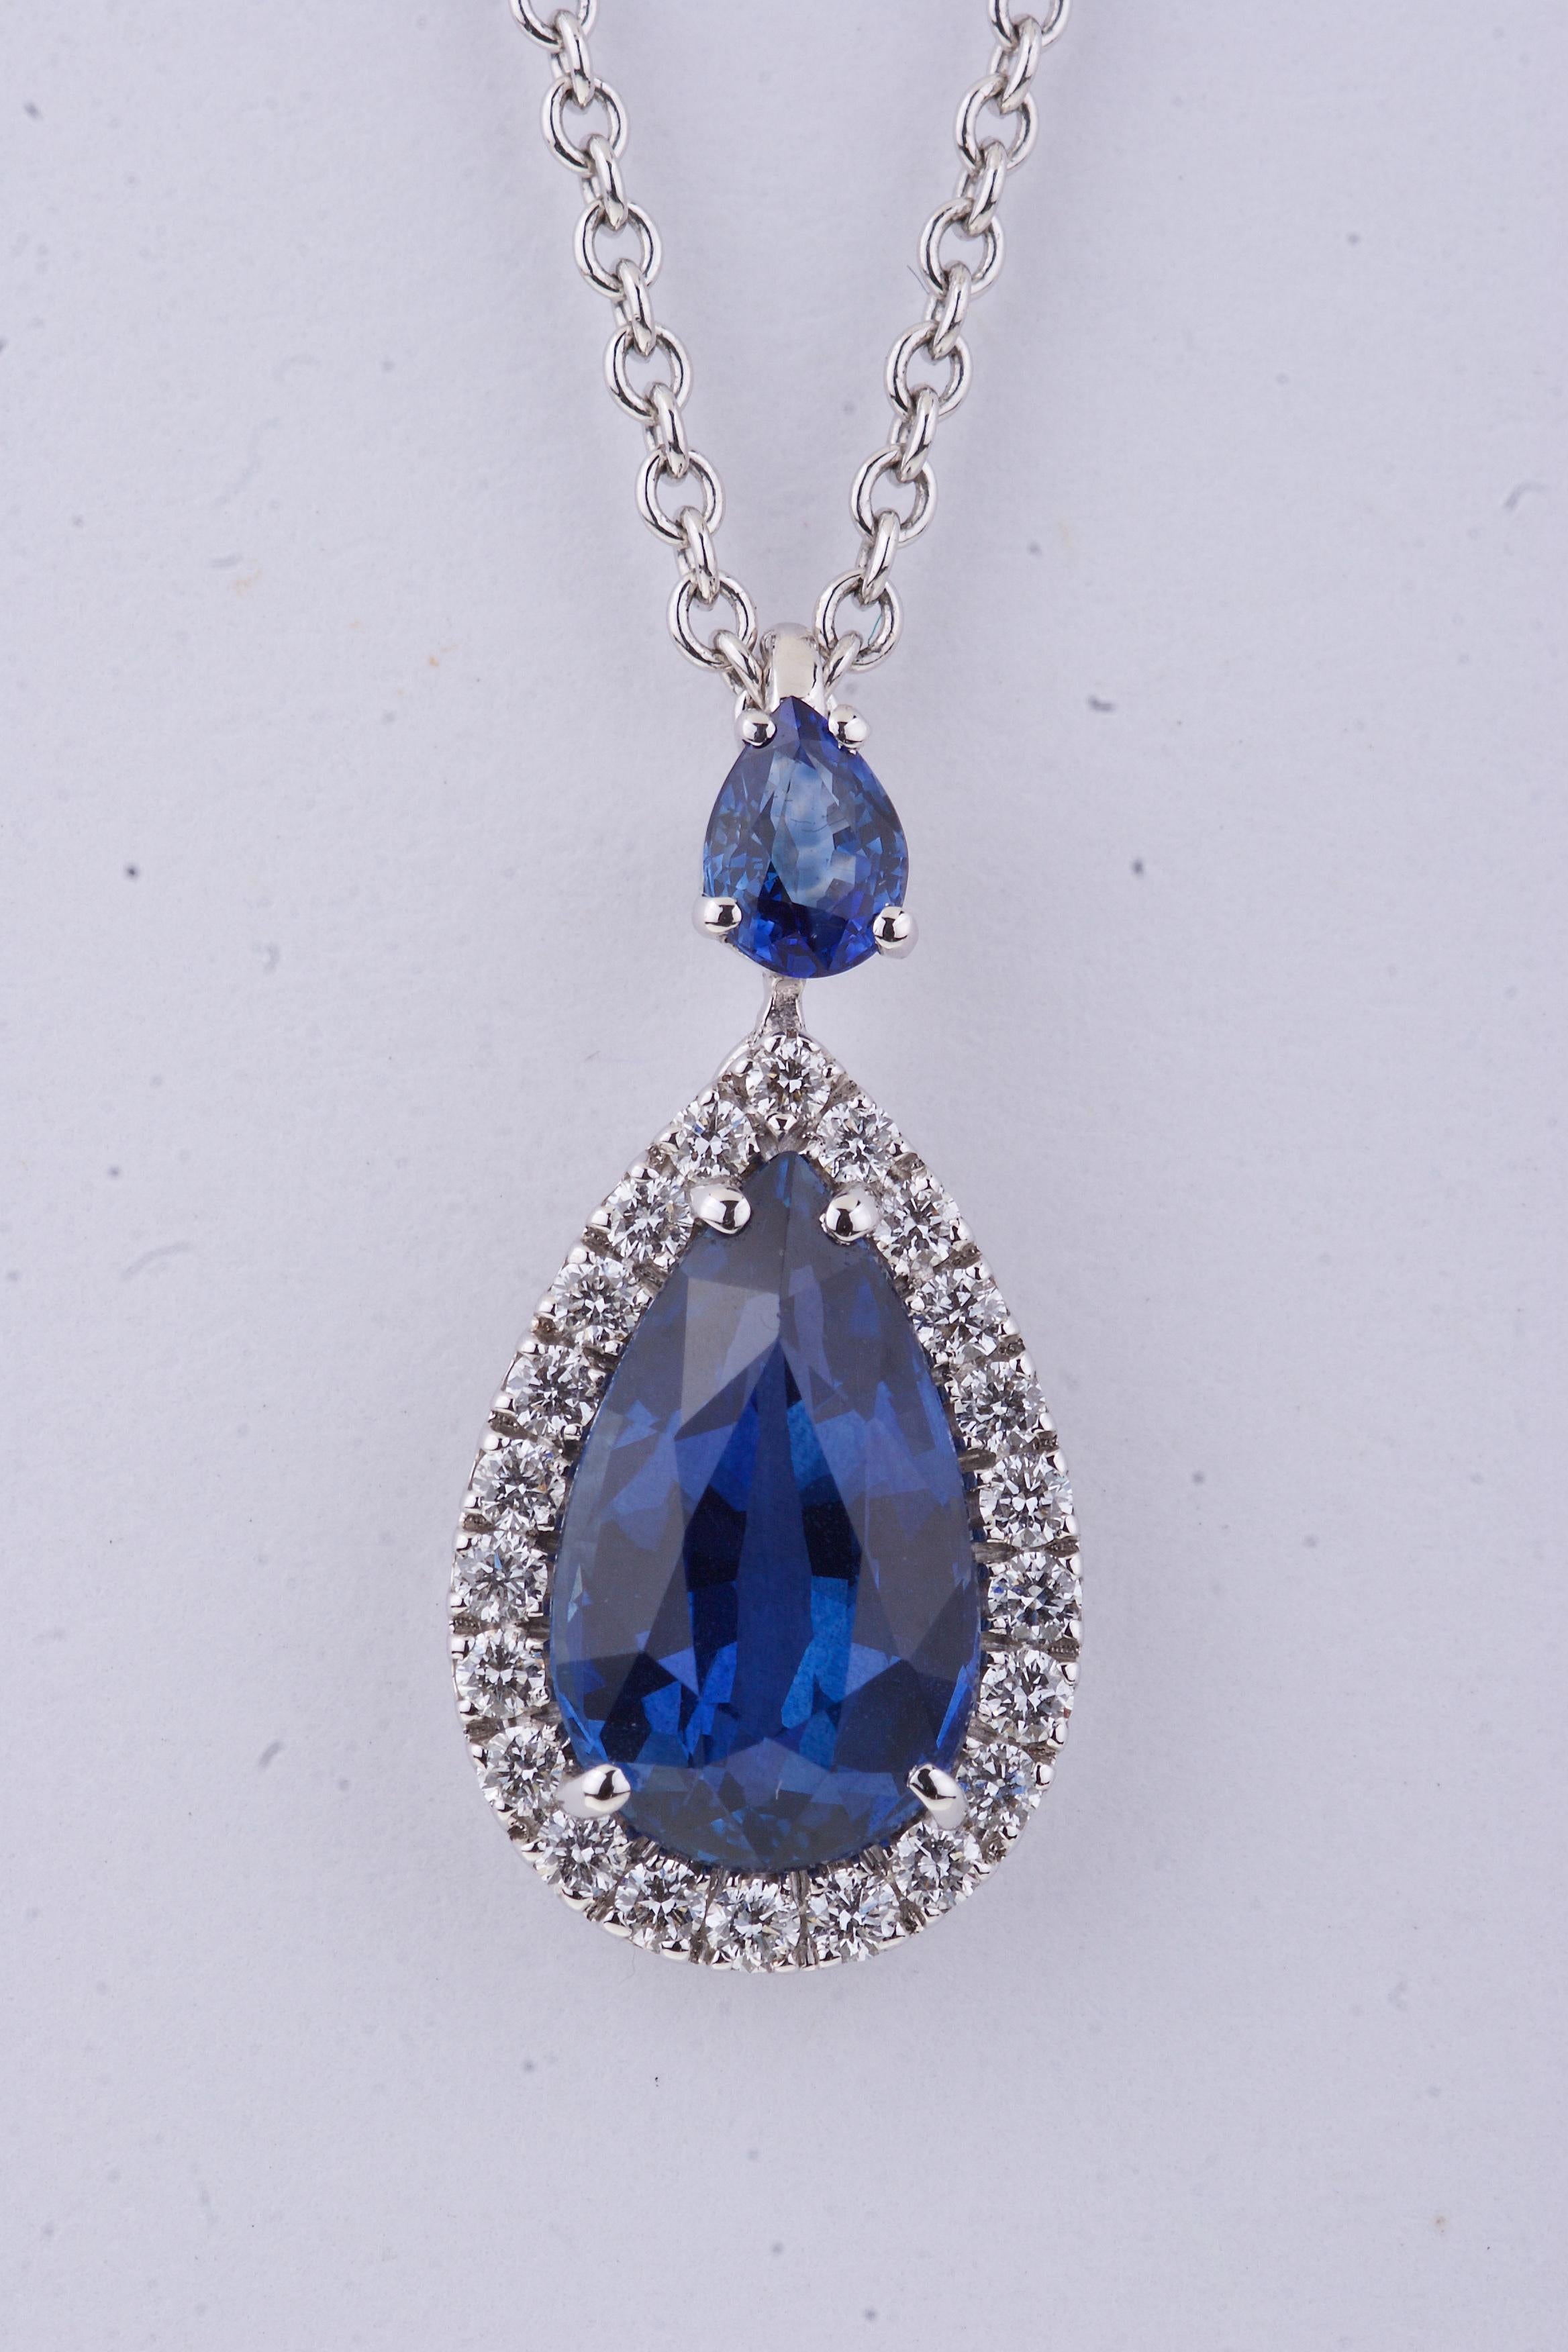 Women's Pendant Drop Sapphire Necklace with Diamonds and Pear Cut Sapphire on Top